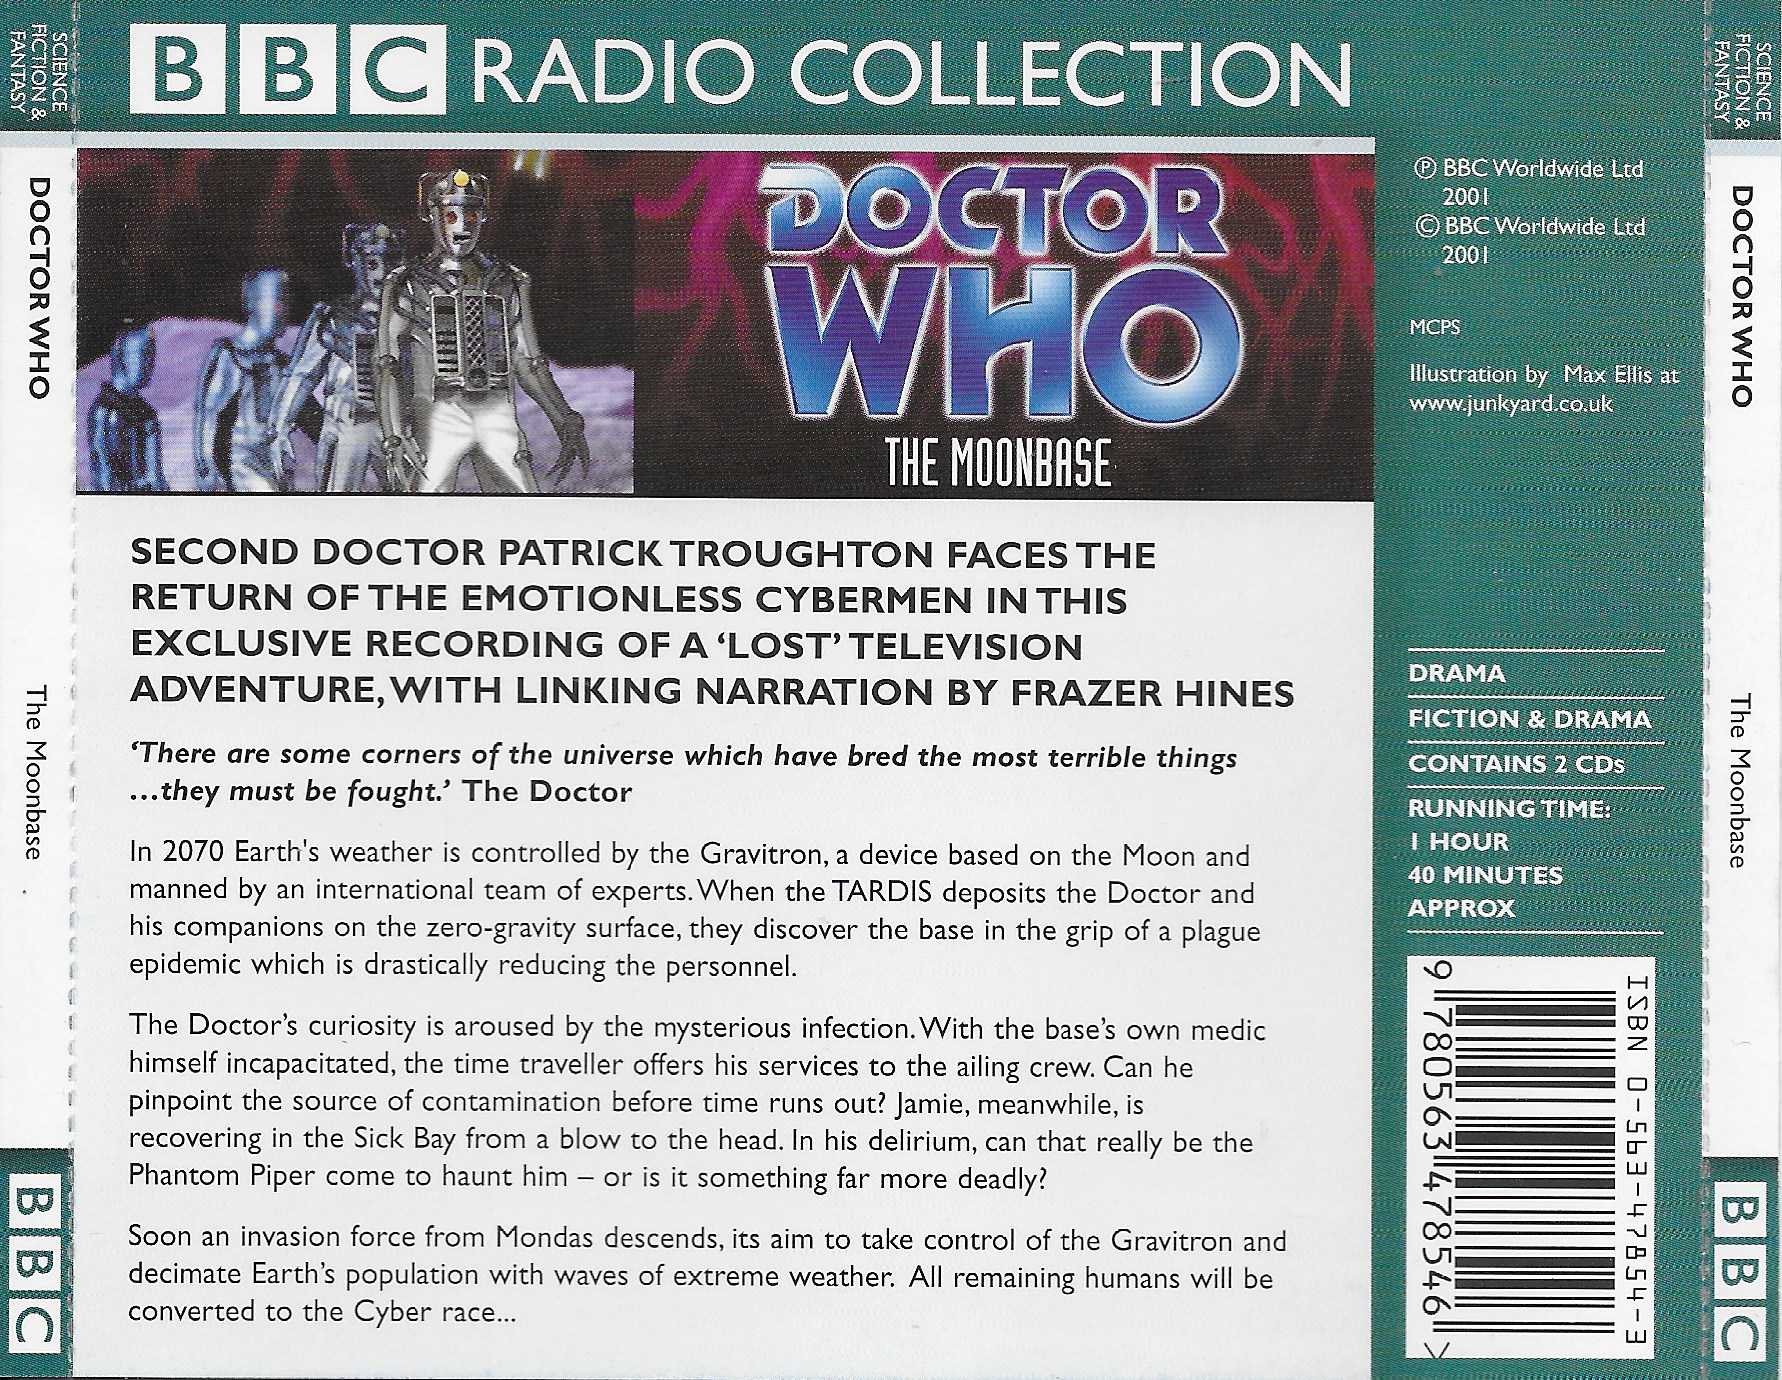 Picture of ISBN 0-563-47854-3 Doctor Who - The Moonbase by artist Kit Pedler from the BBC records and Tapes library